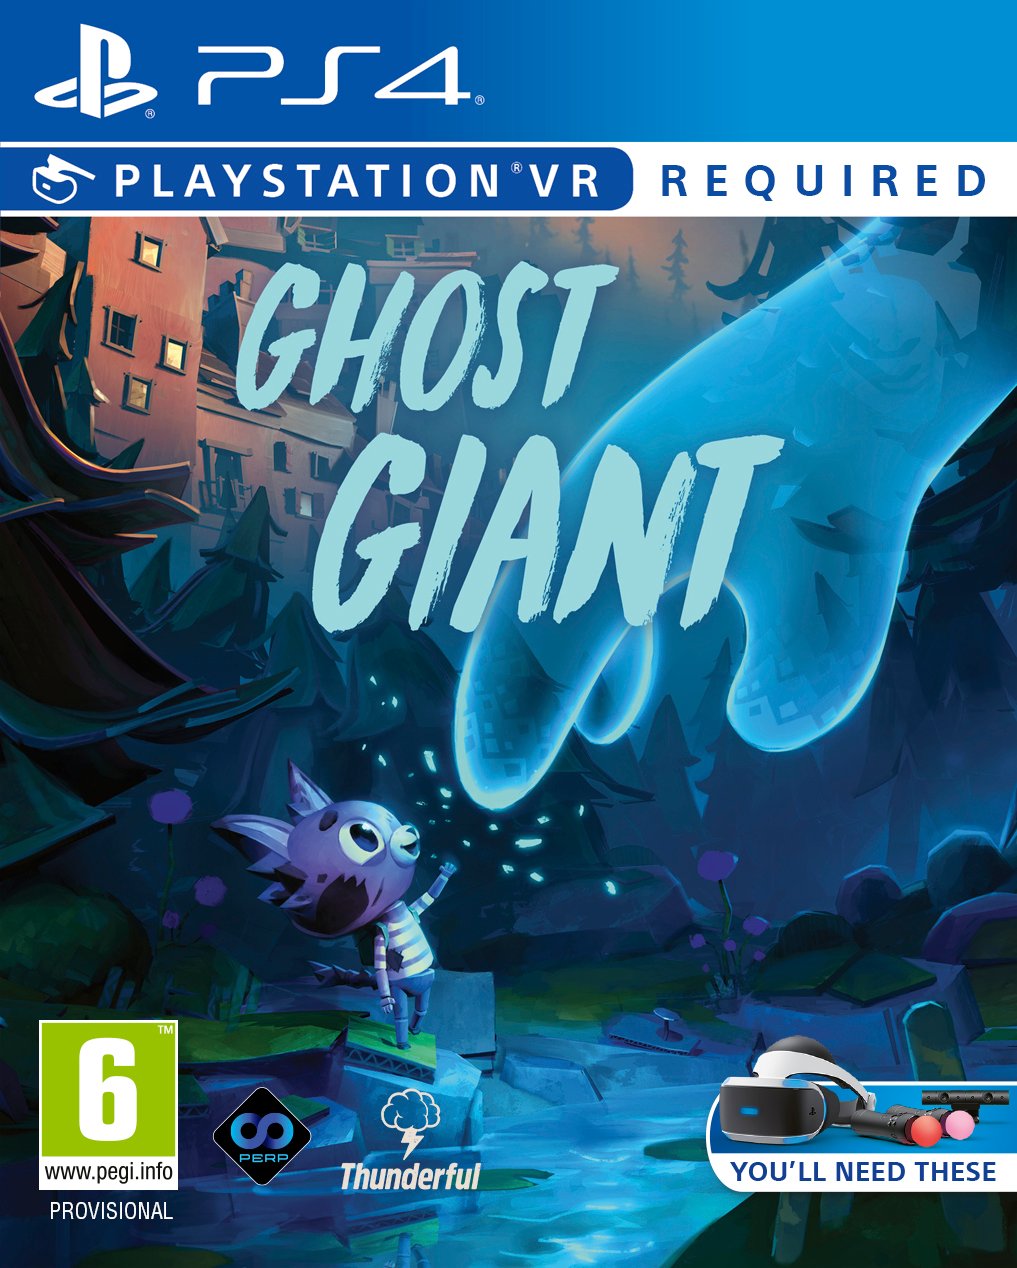 download free the ghost giant